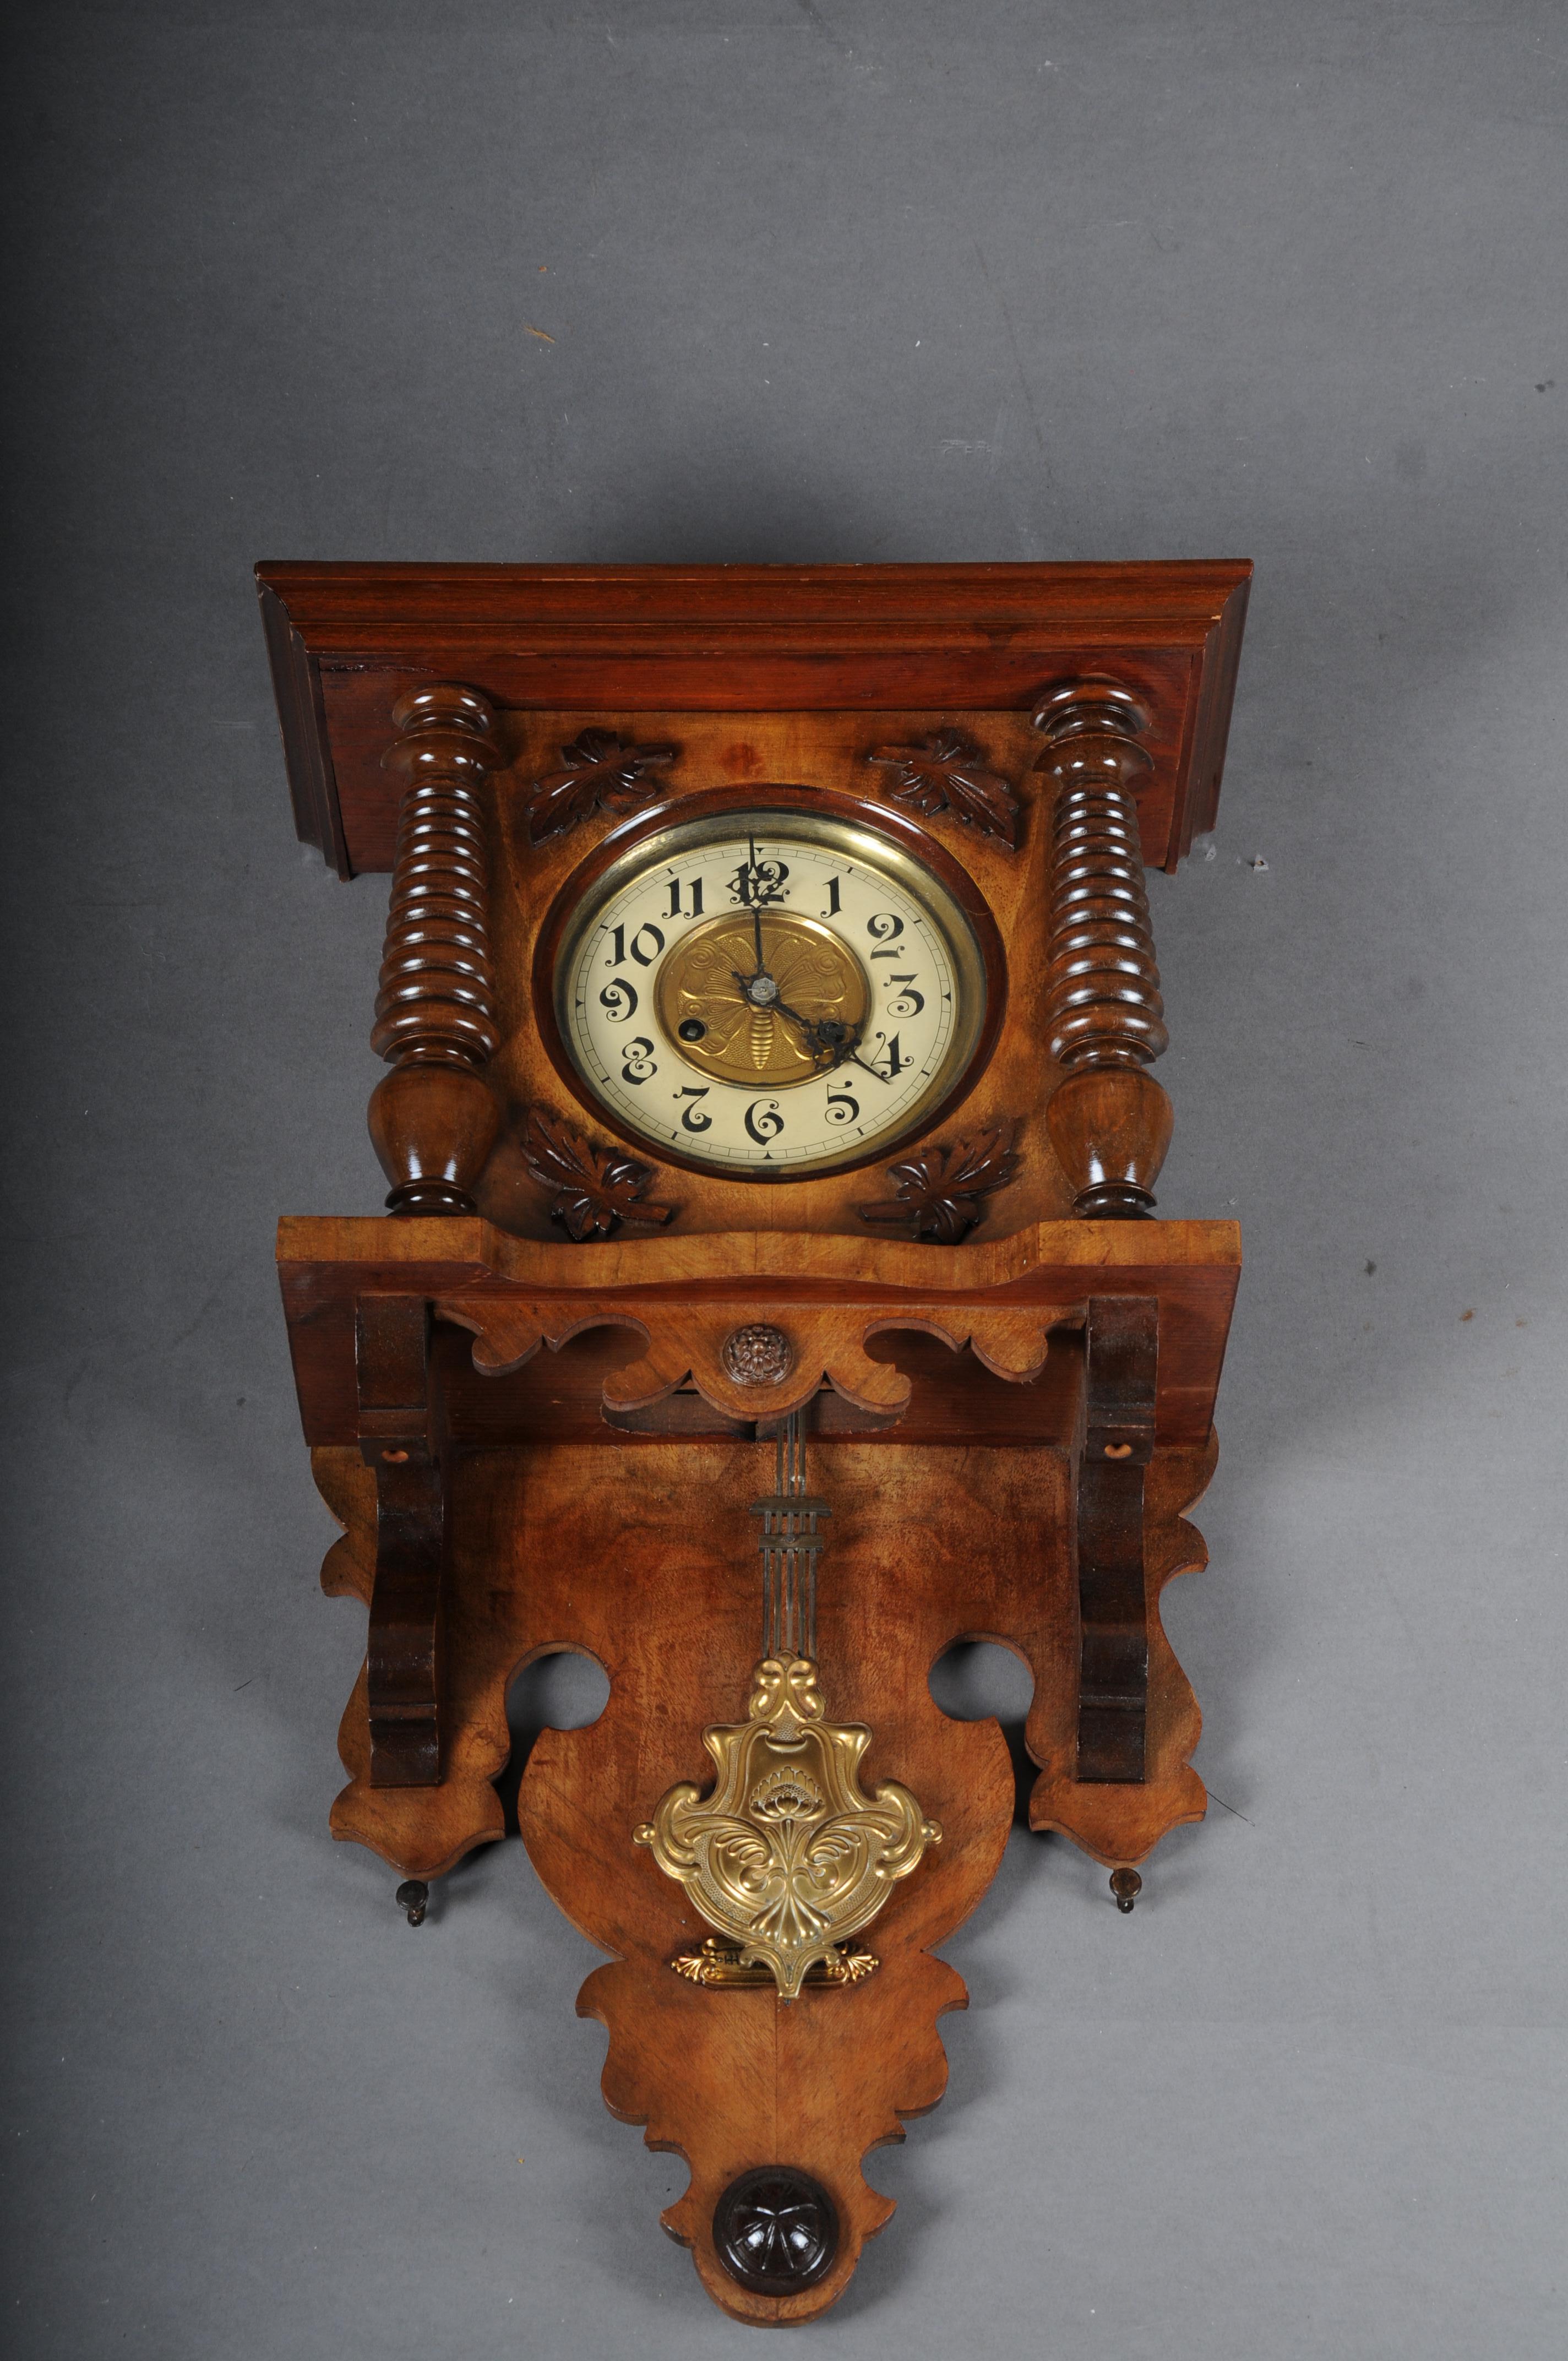 Antique found time wall clock/regulator from around 1880

Solid wood, richly carved with brass pendulum.
Movement needs to be checked.